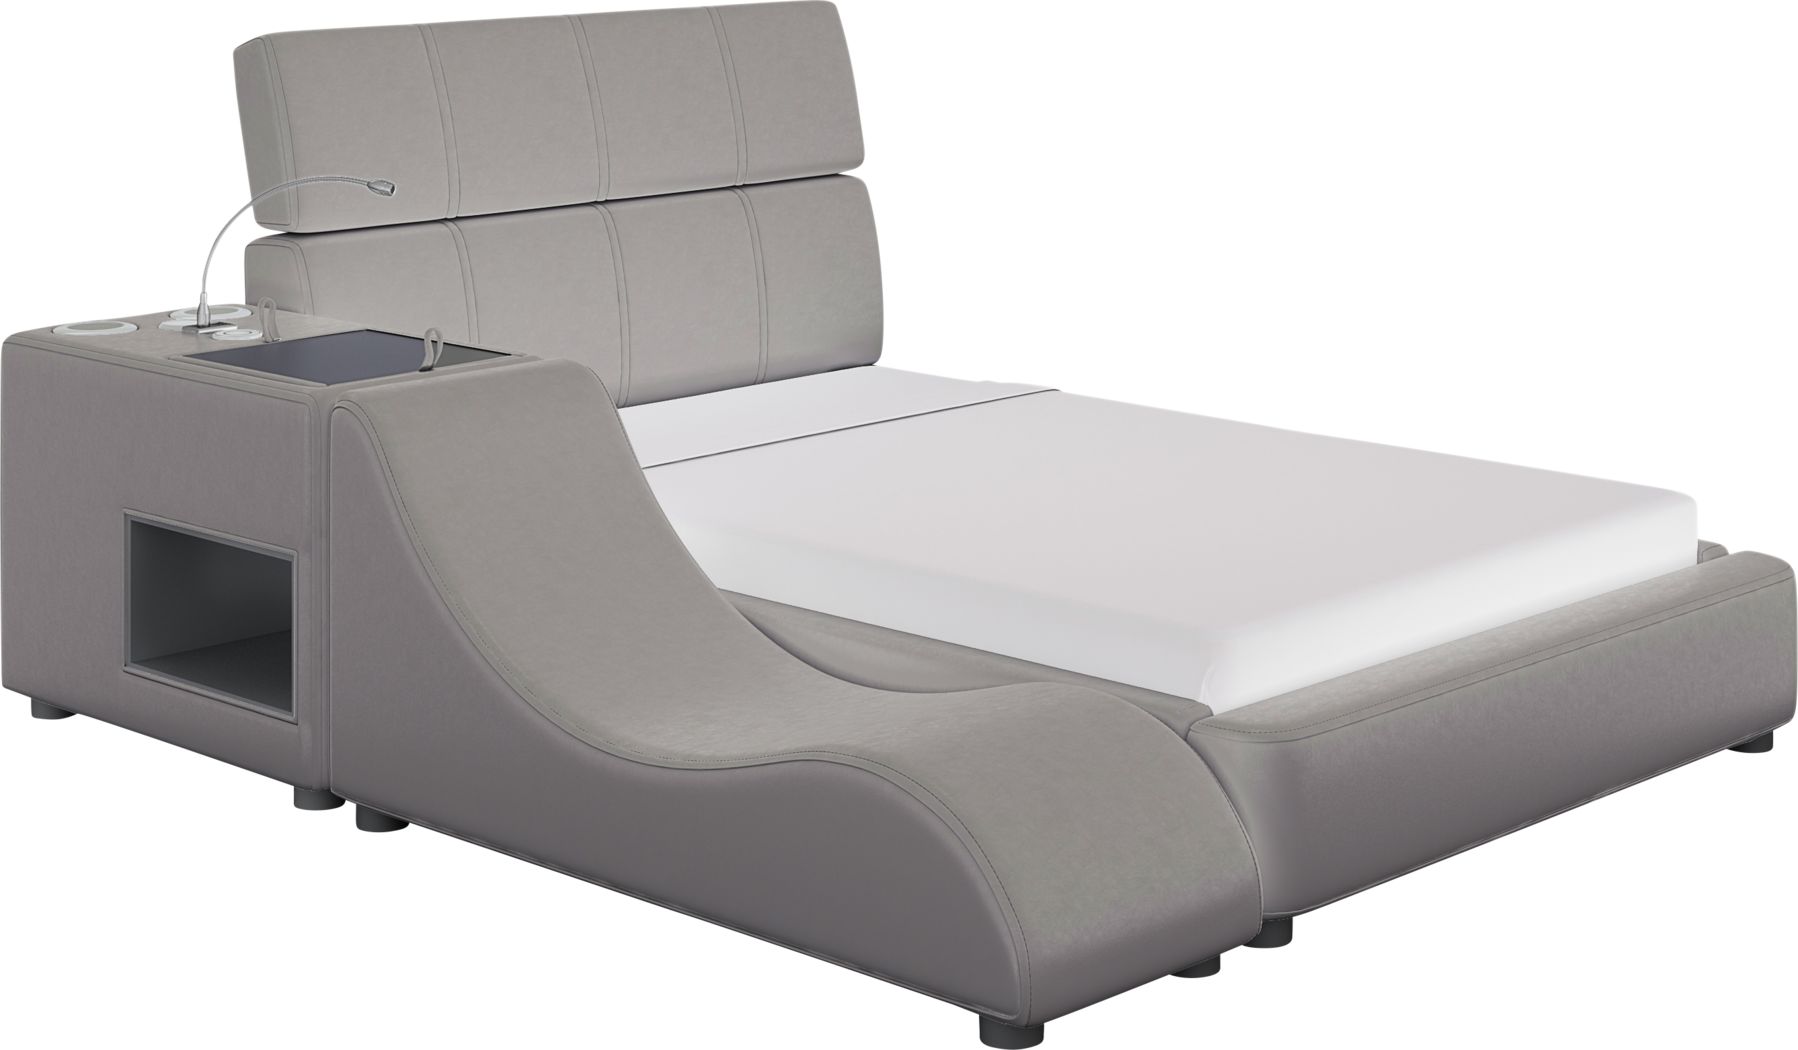 Leather Twin Beds, Leather Twin Bed